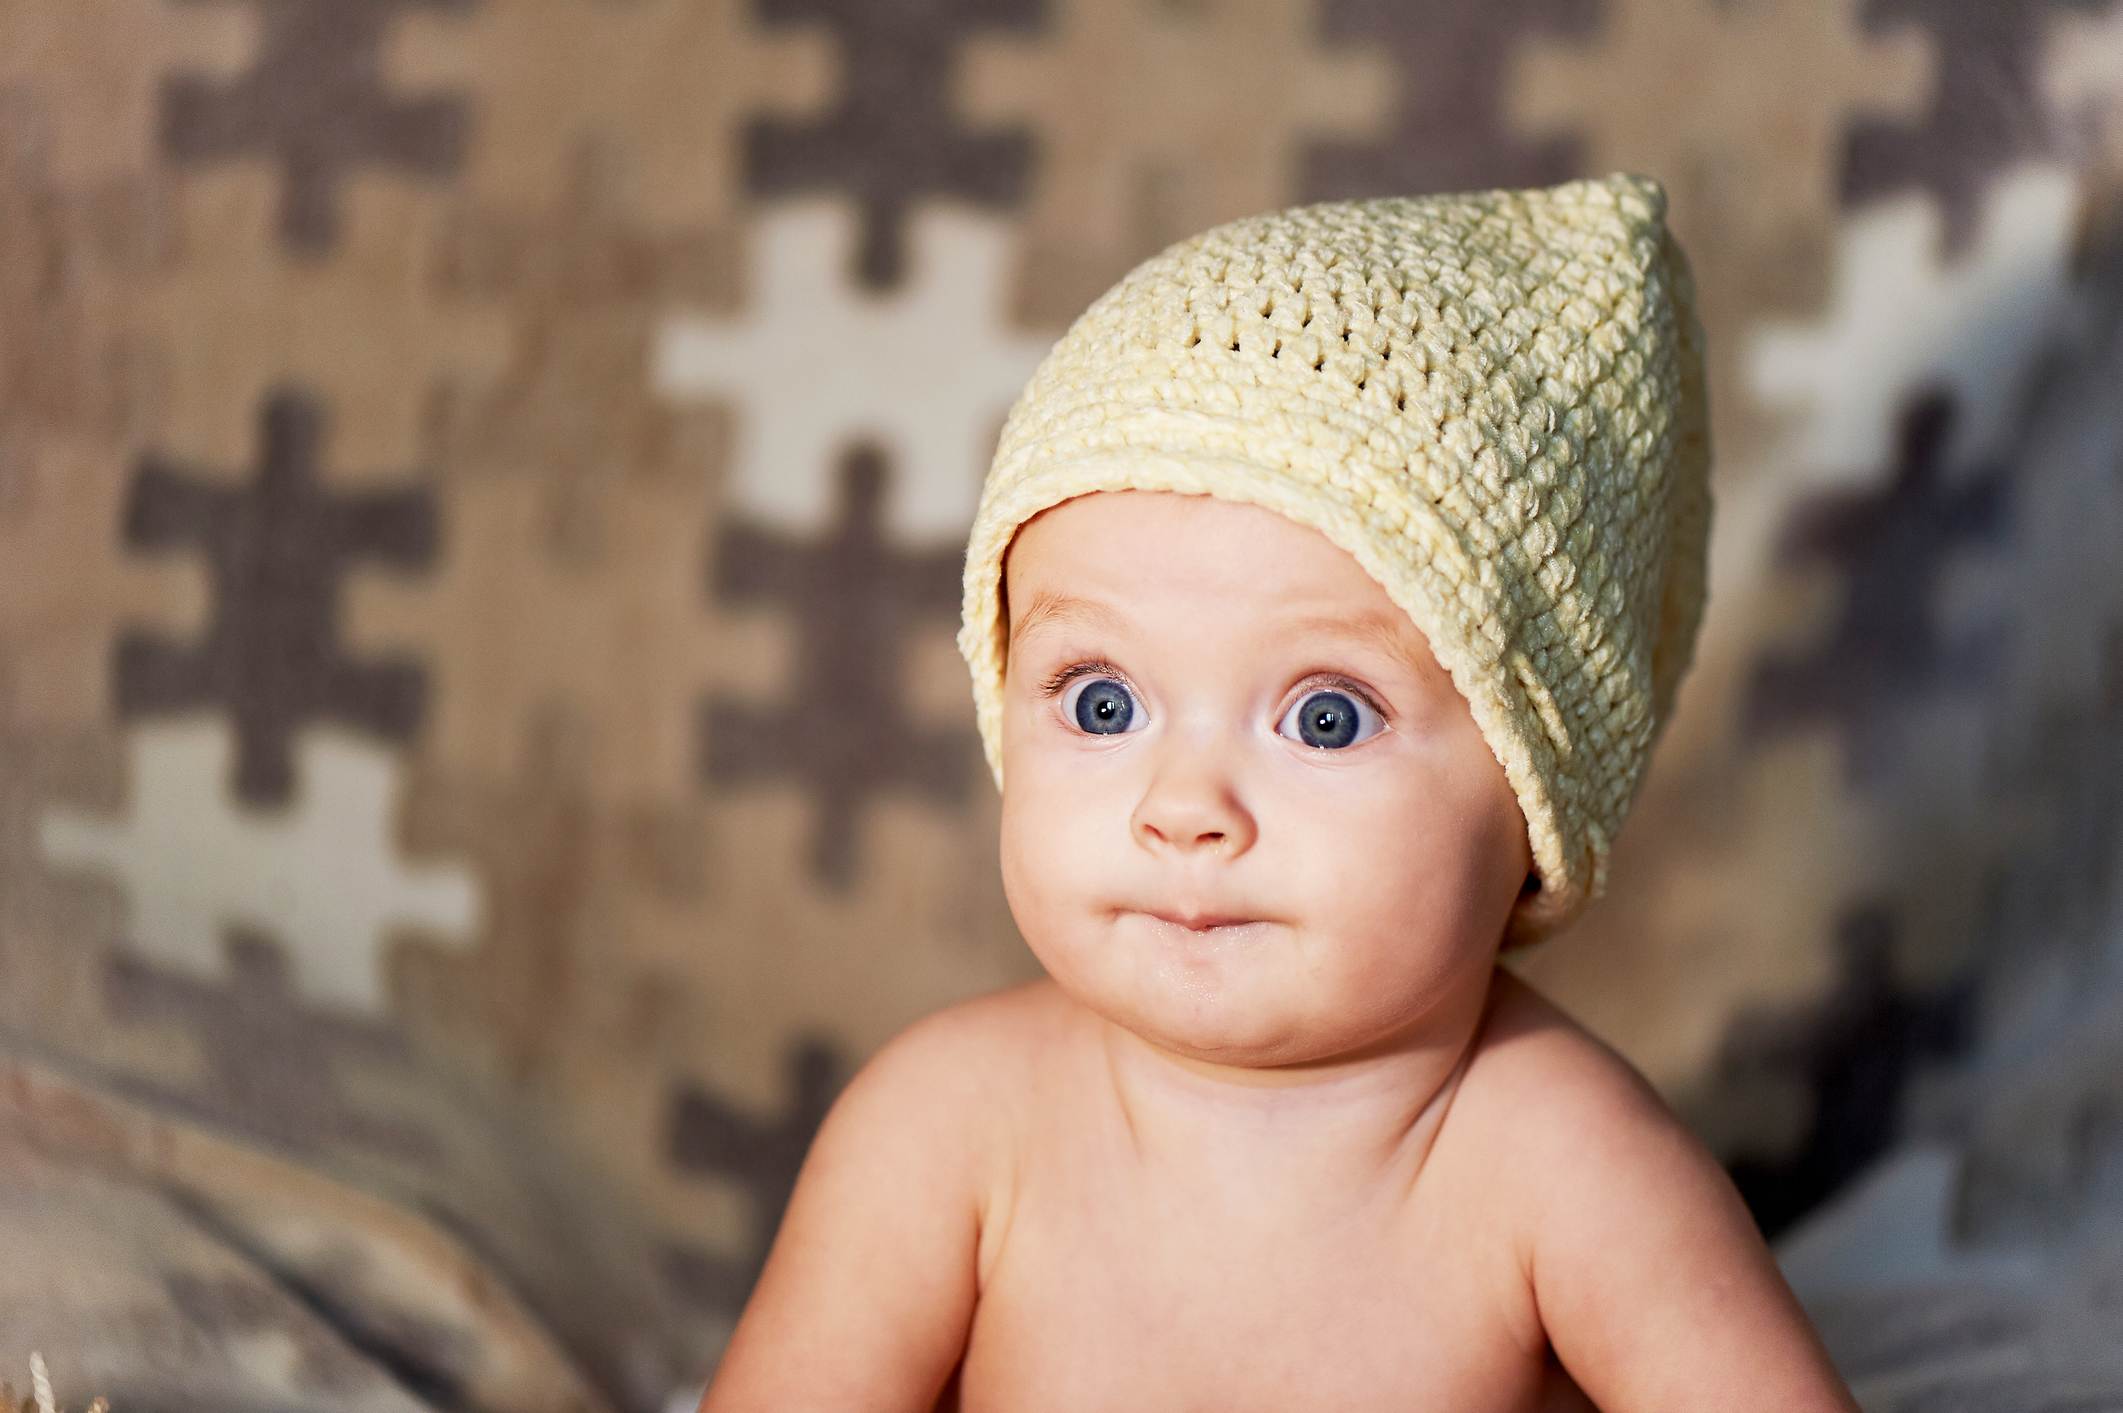 Little Newborn baby with big eyes hat knitting on a plain background